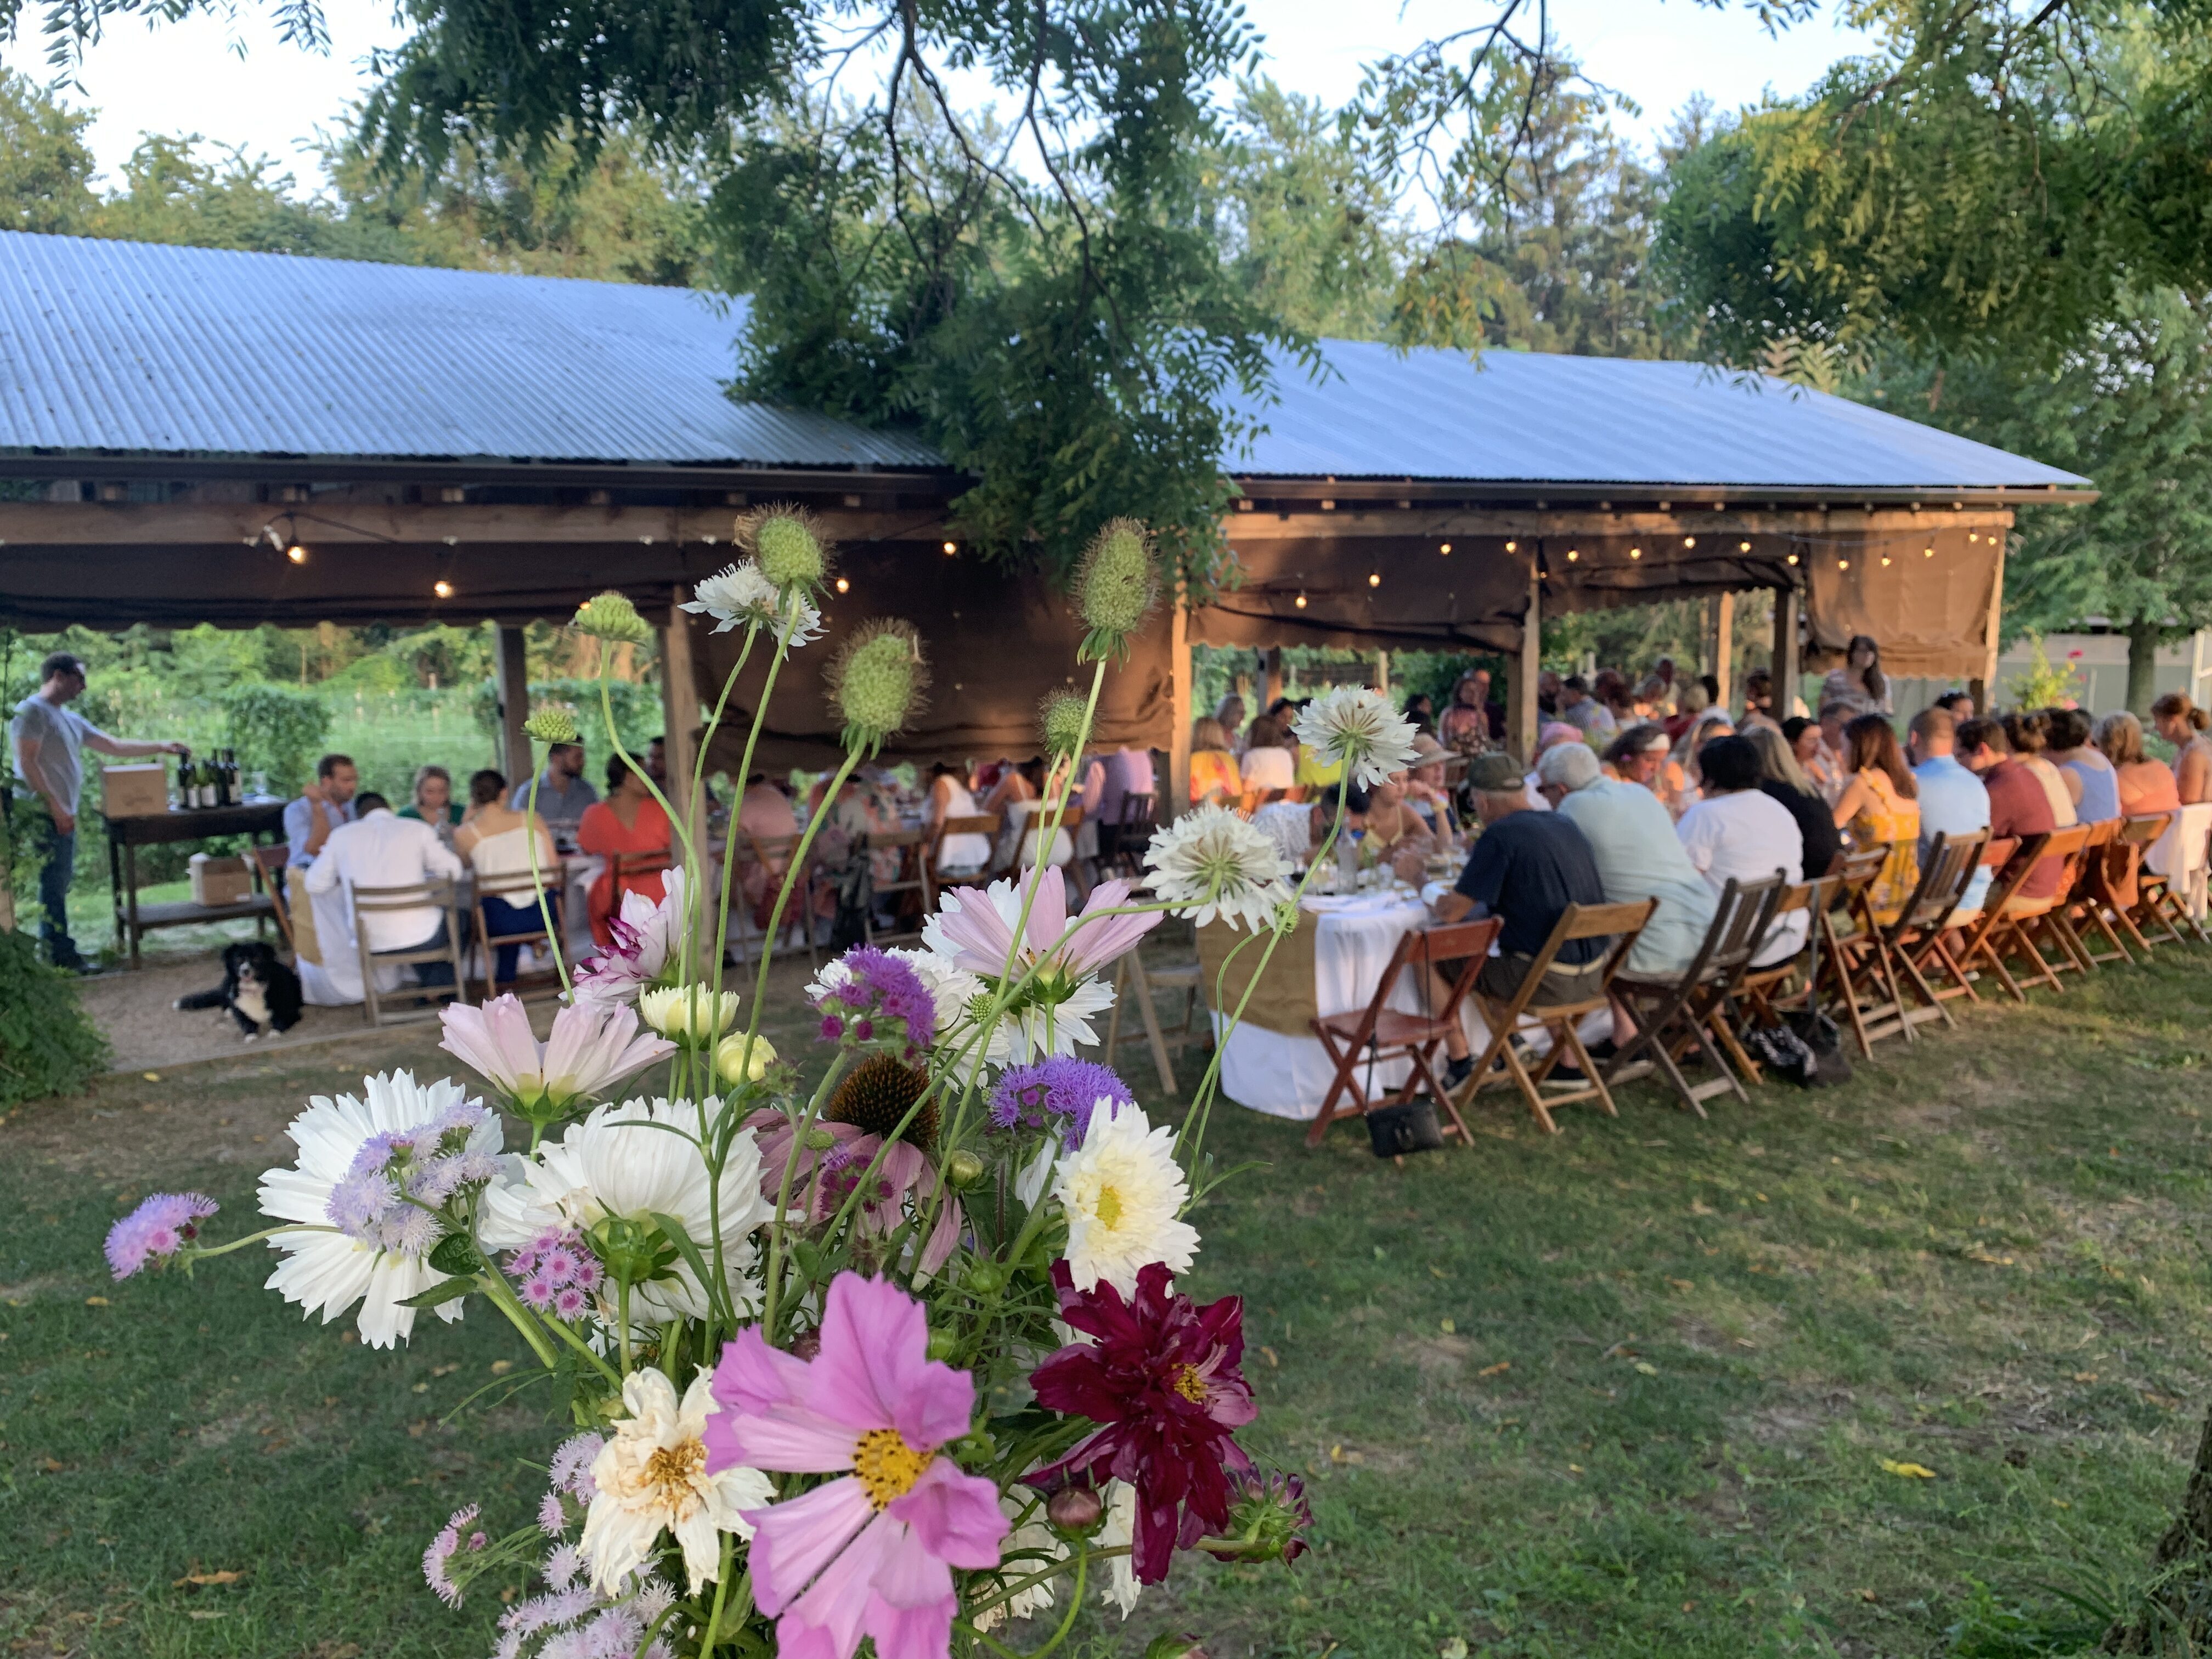 Guests sitting down to one of our Farm Dinner events